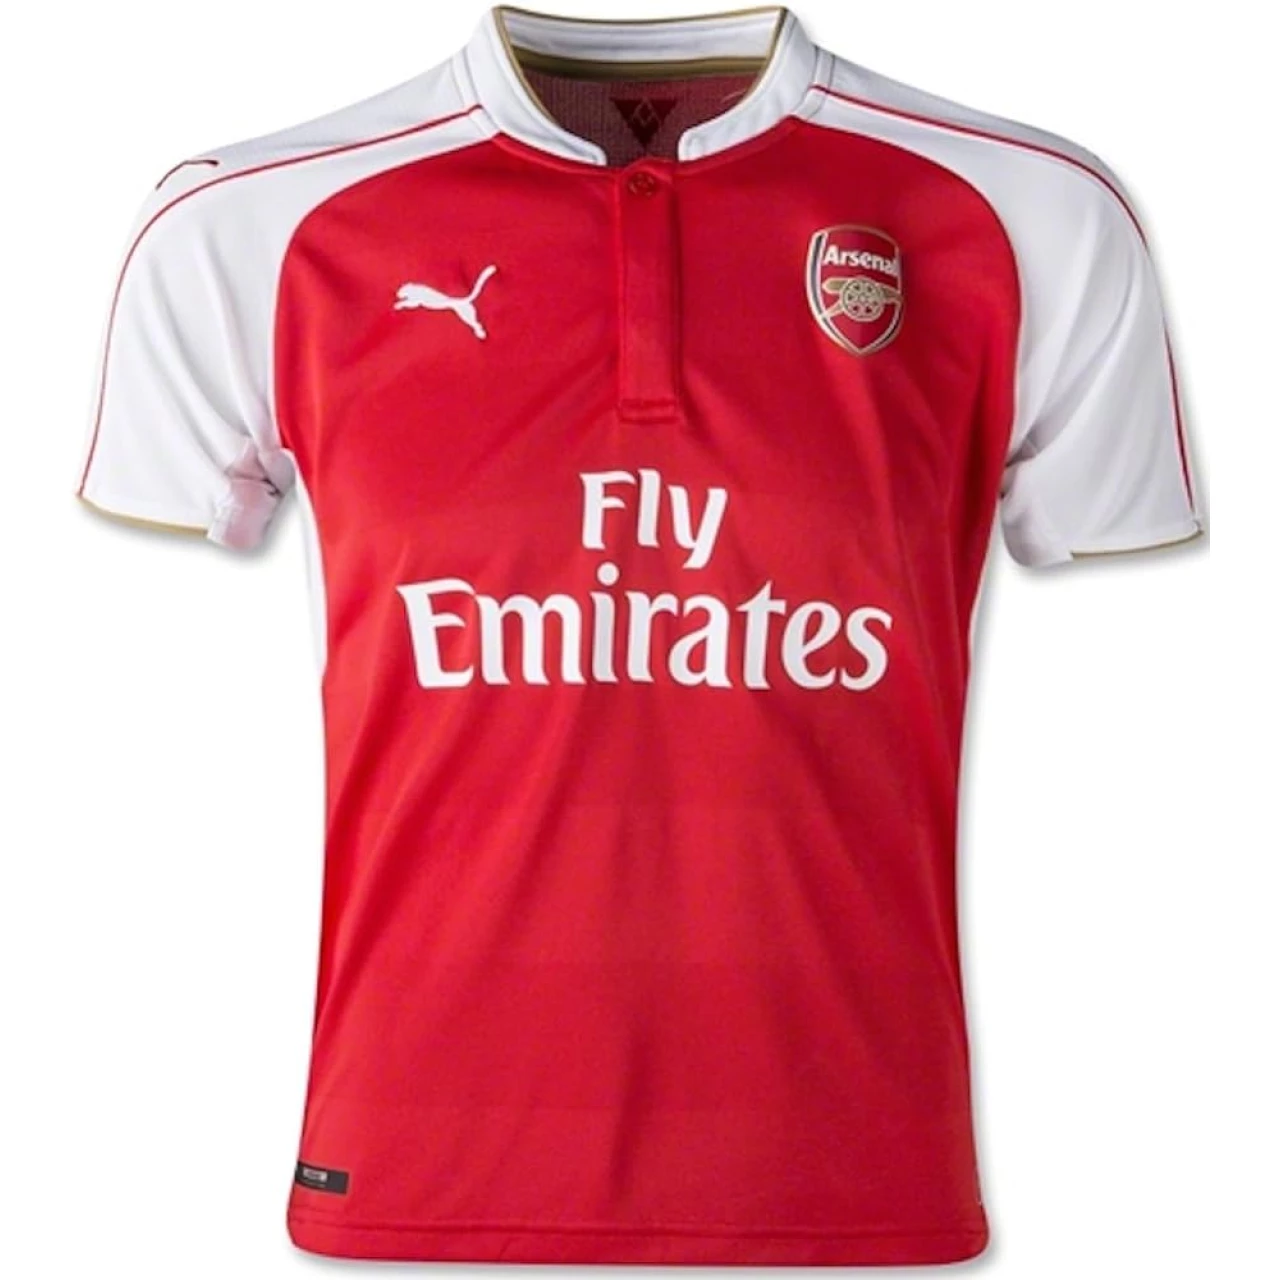 PUMA Youth Drycell 2015 Arsenal Home Replica Jersey X-Large